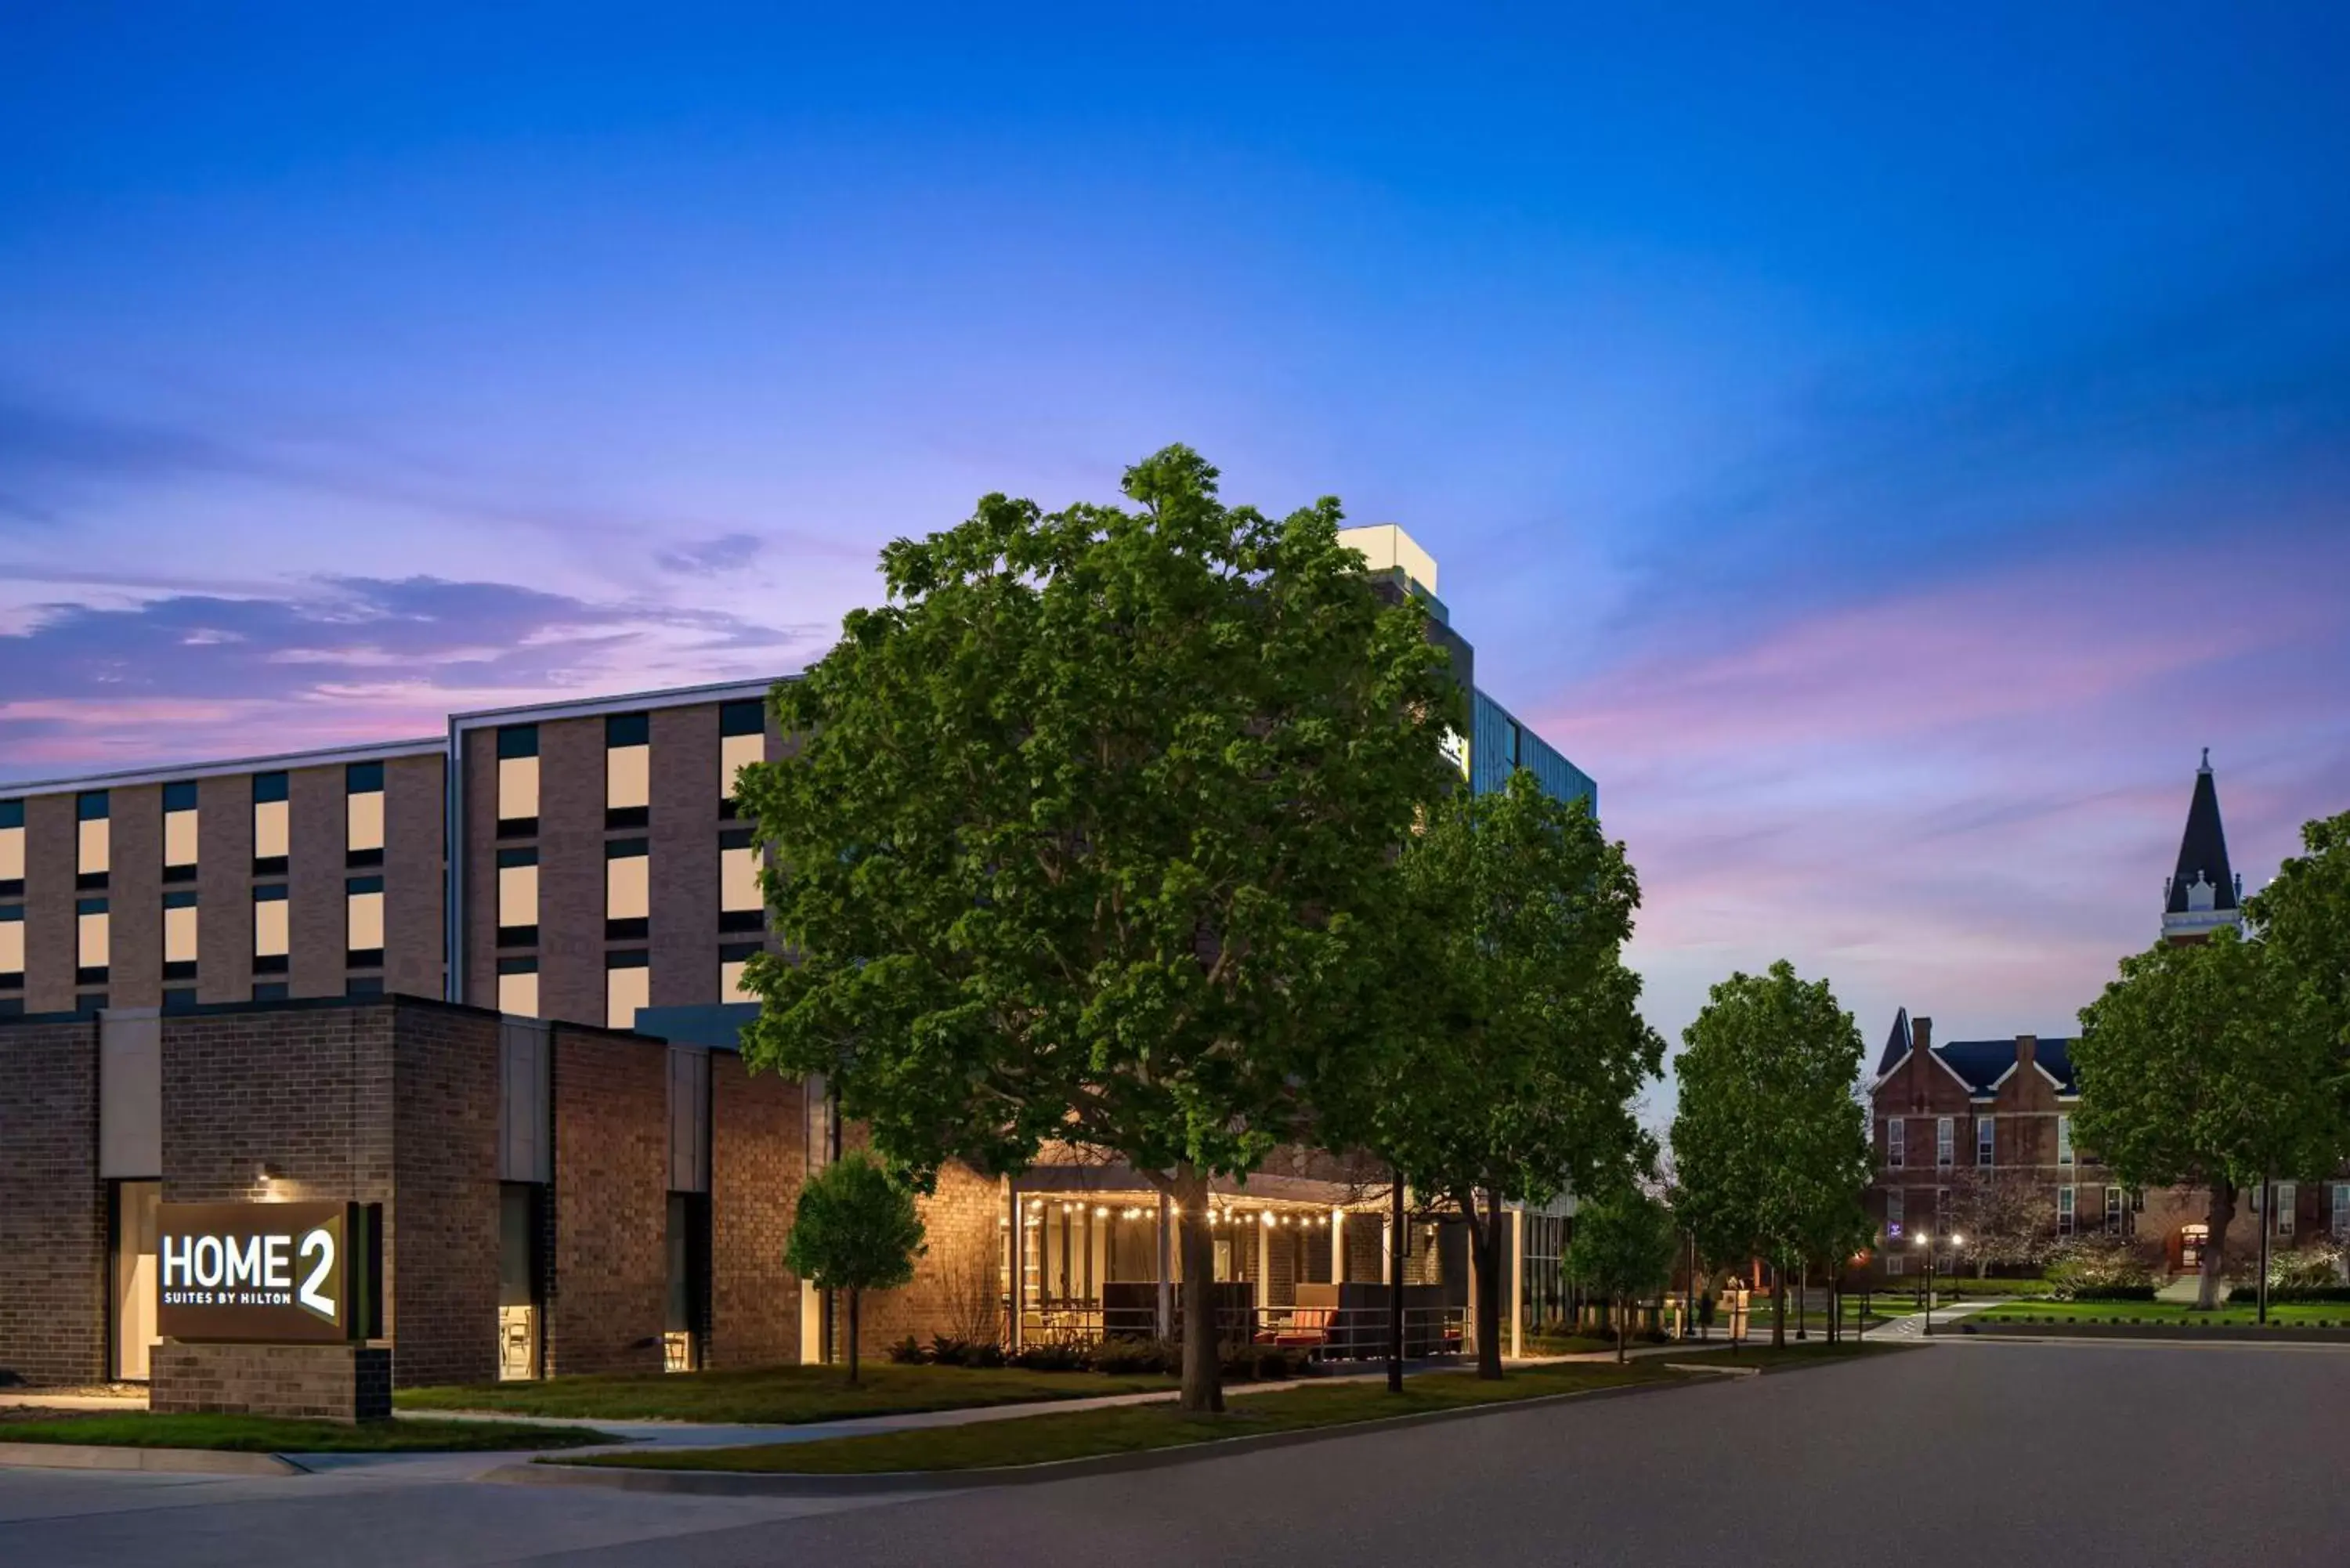 Property Building in Home2 Suites by Hilton Des Moines at Drake University